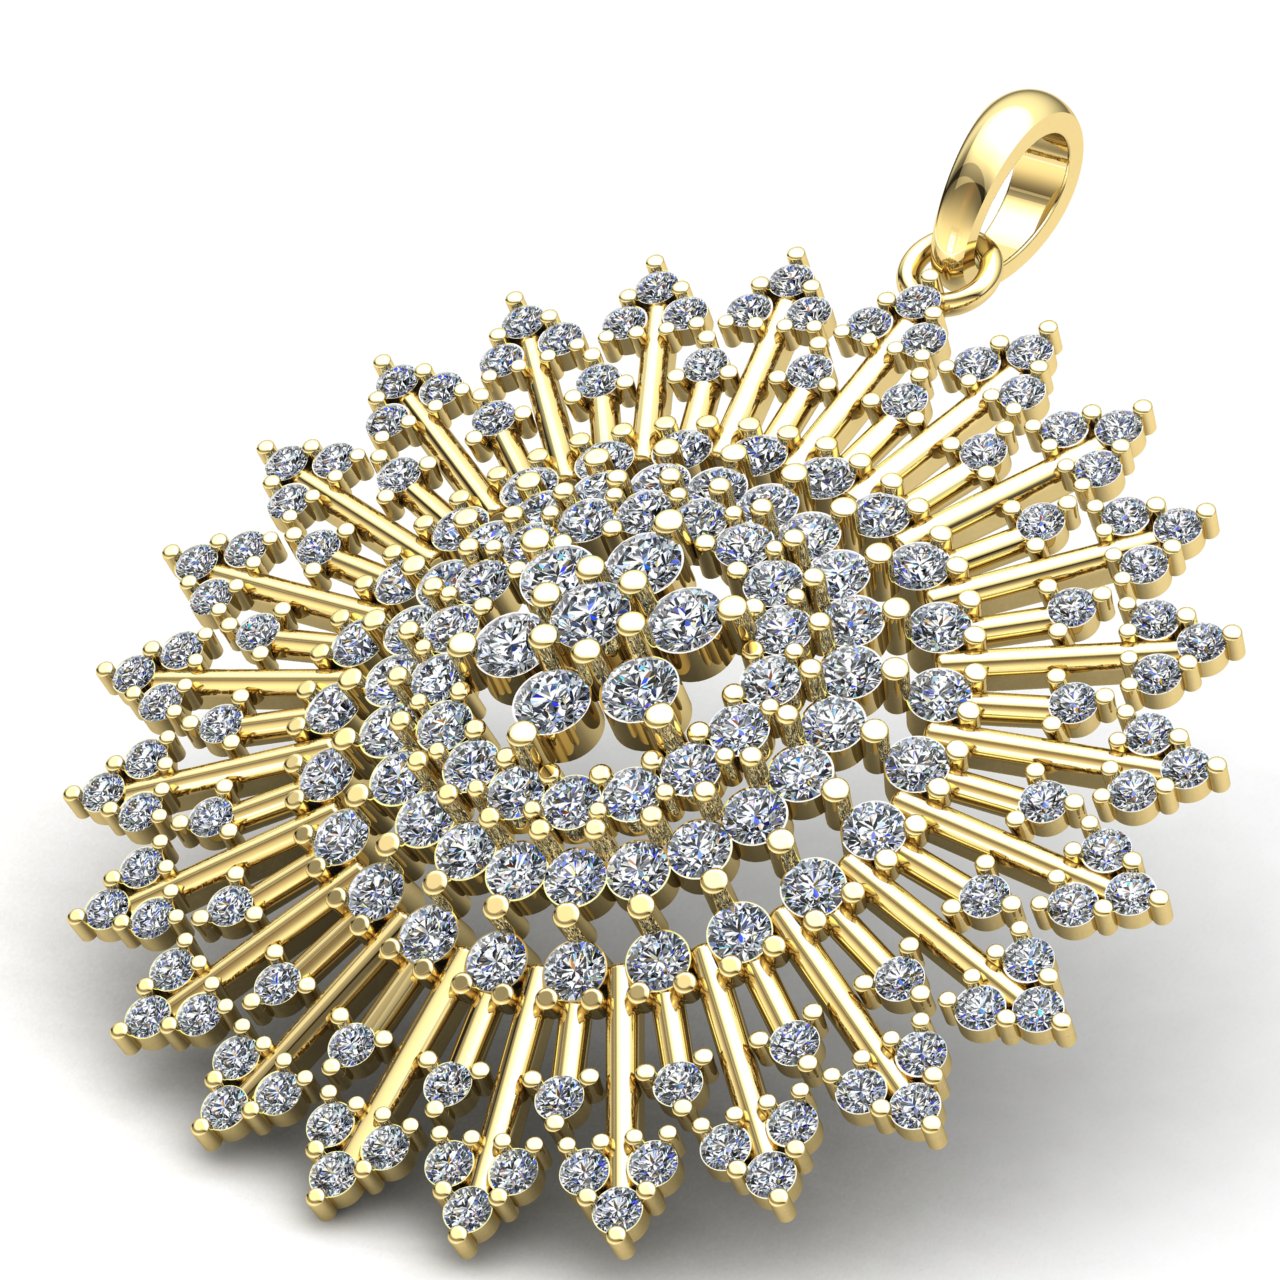 Jewel We Sell 8ctw Round Cut Diamond Ladies Fancy Halo Circle Pendant Solid 14K Yellow Gold GH SI2